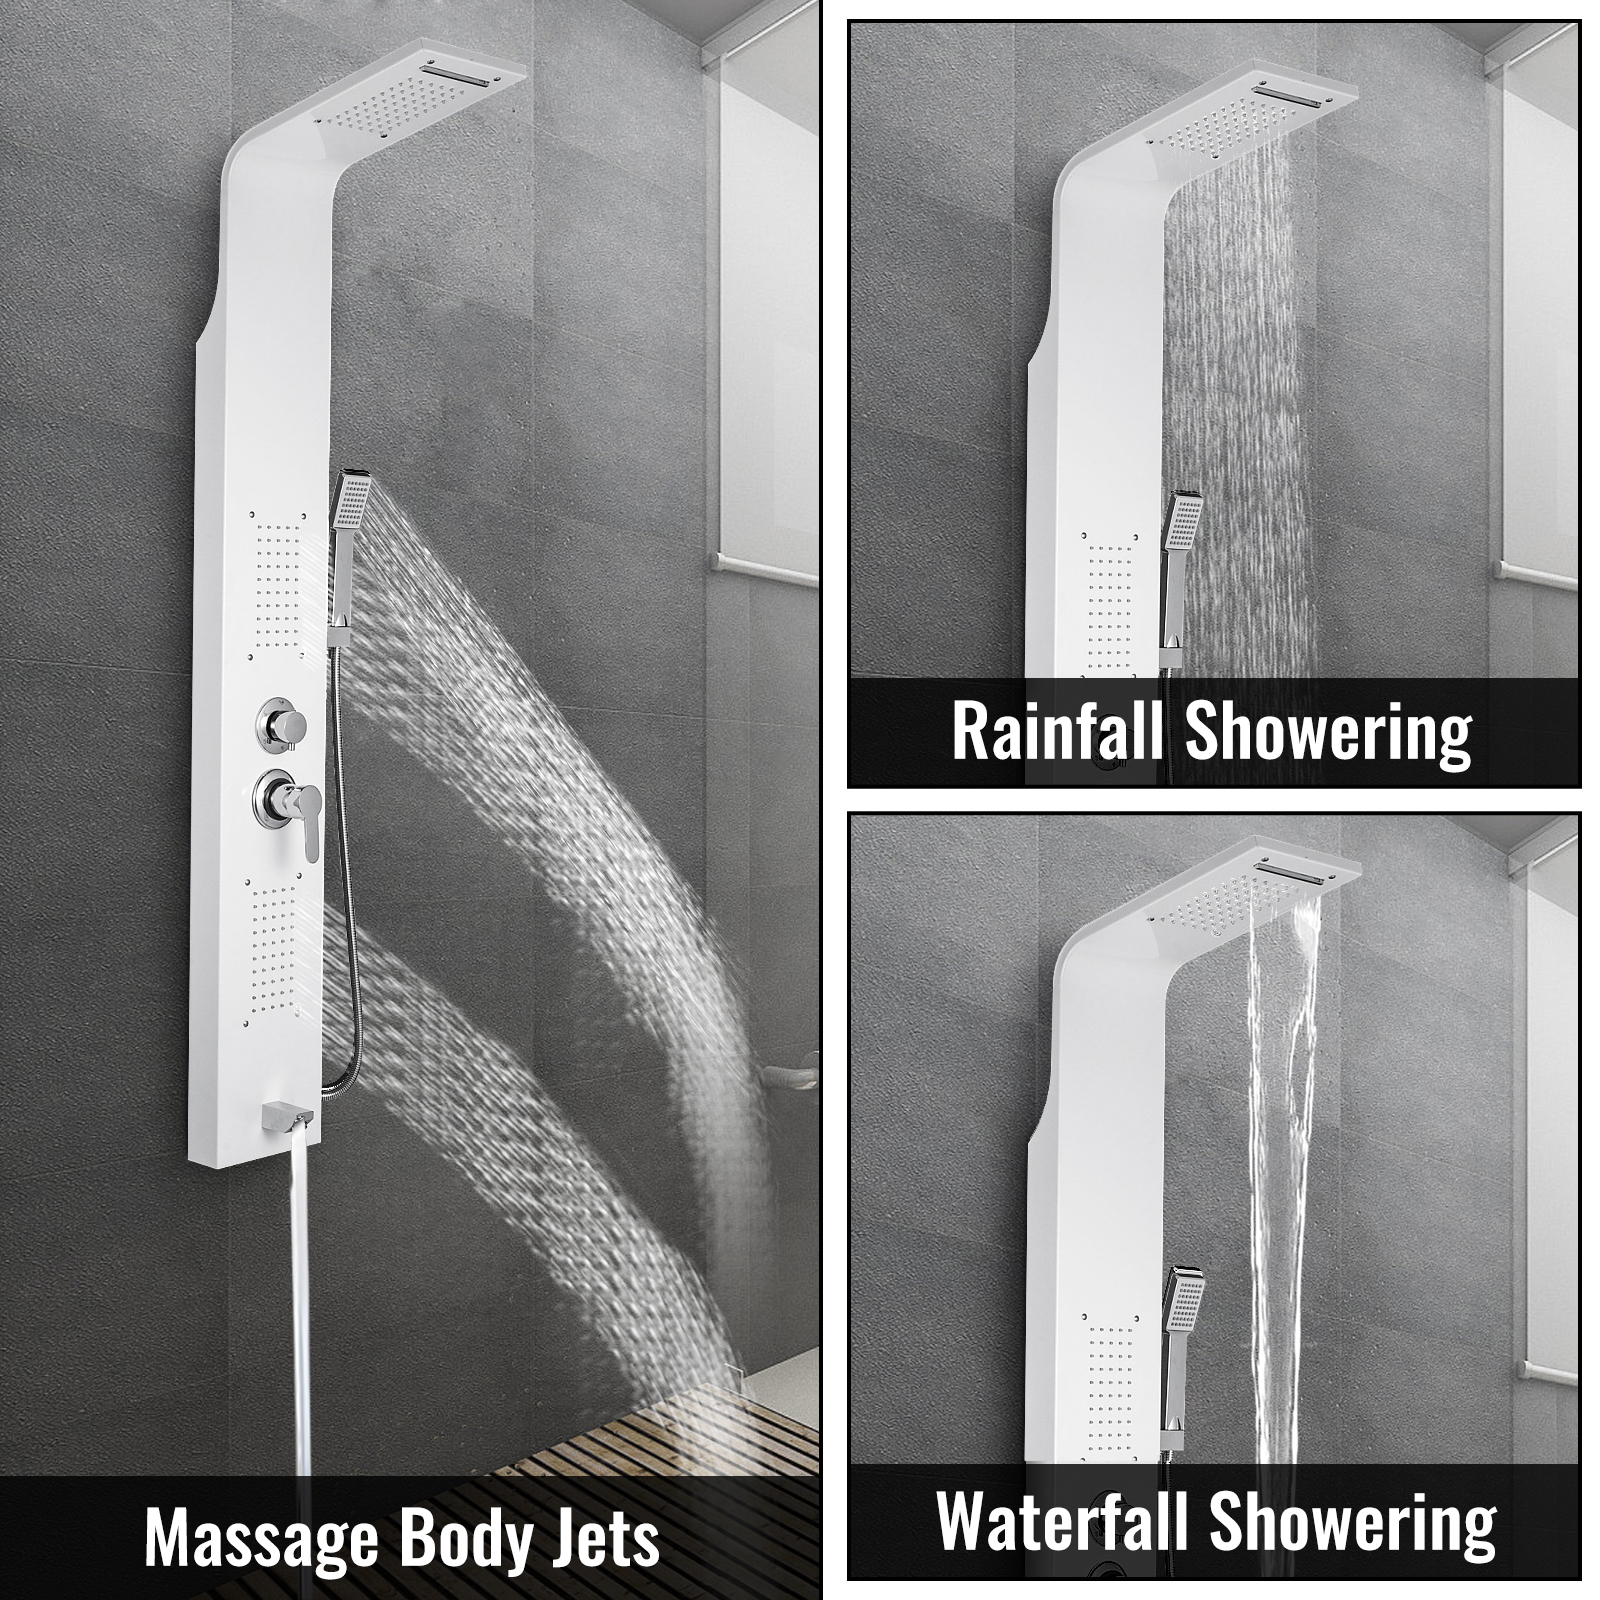 Details about   LED Shower Panel Tower Rain&Waterfall Massage Body System Tub Stainless Steel 